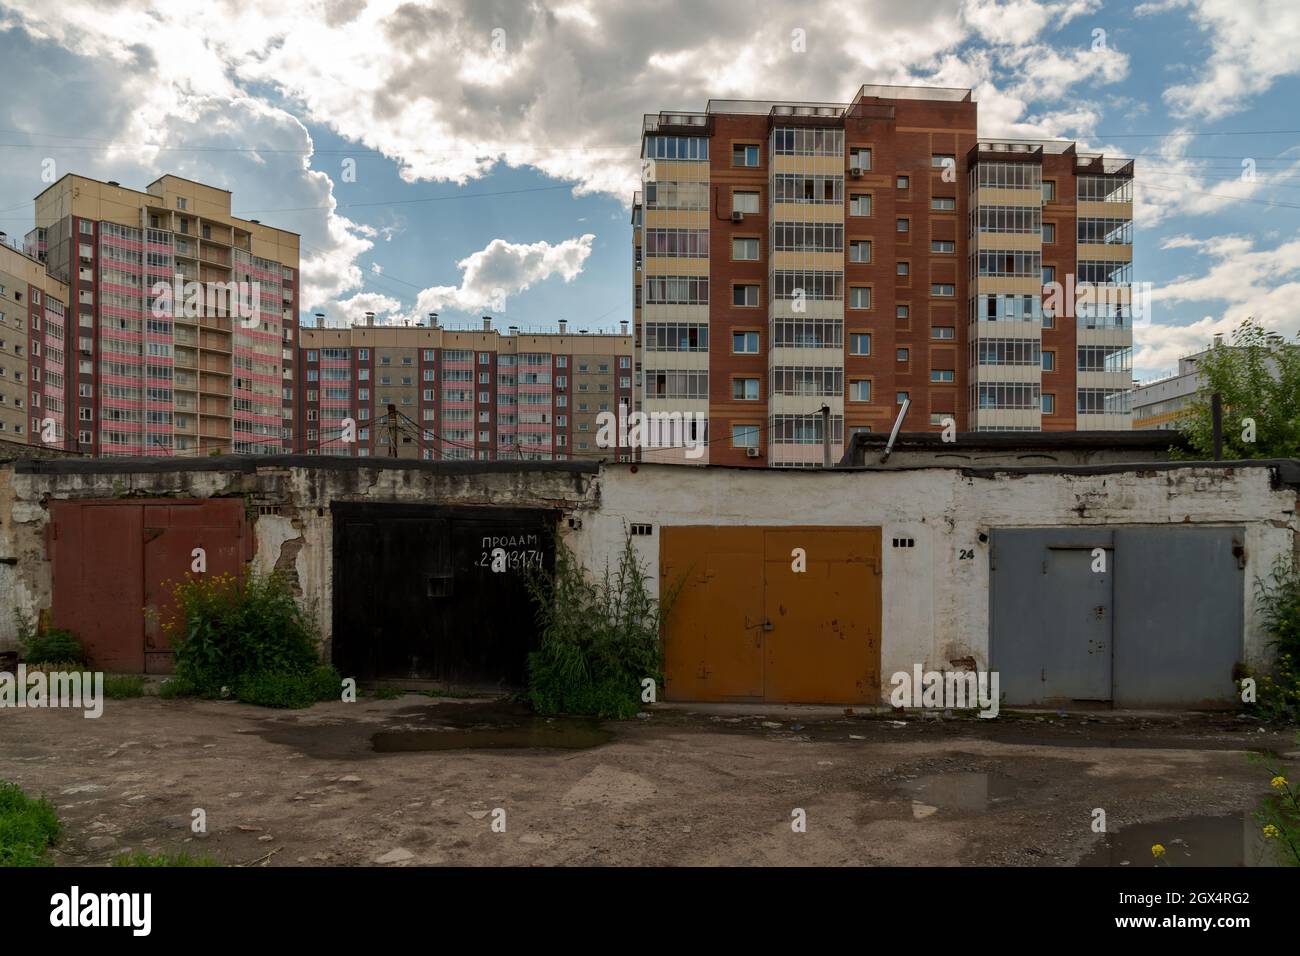 Garages are in a row in a residential area on a summer day, one of them has an inscription in Russian - sell. Stock Photo